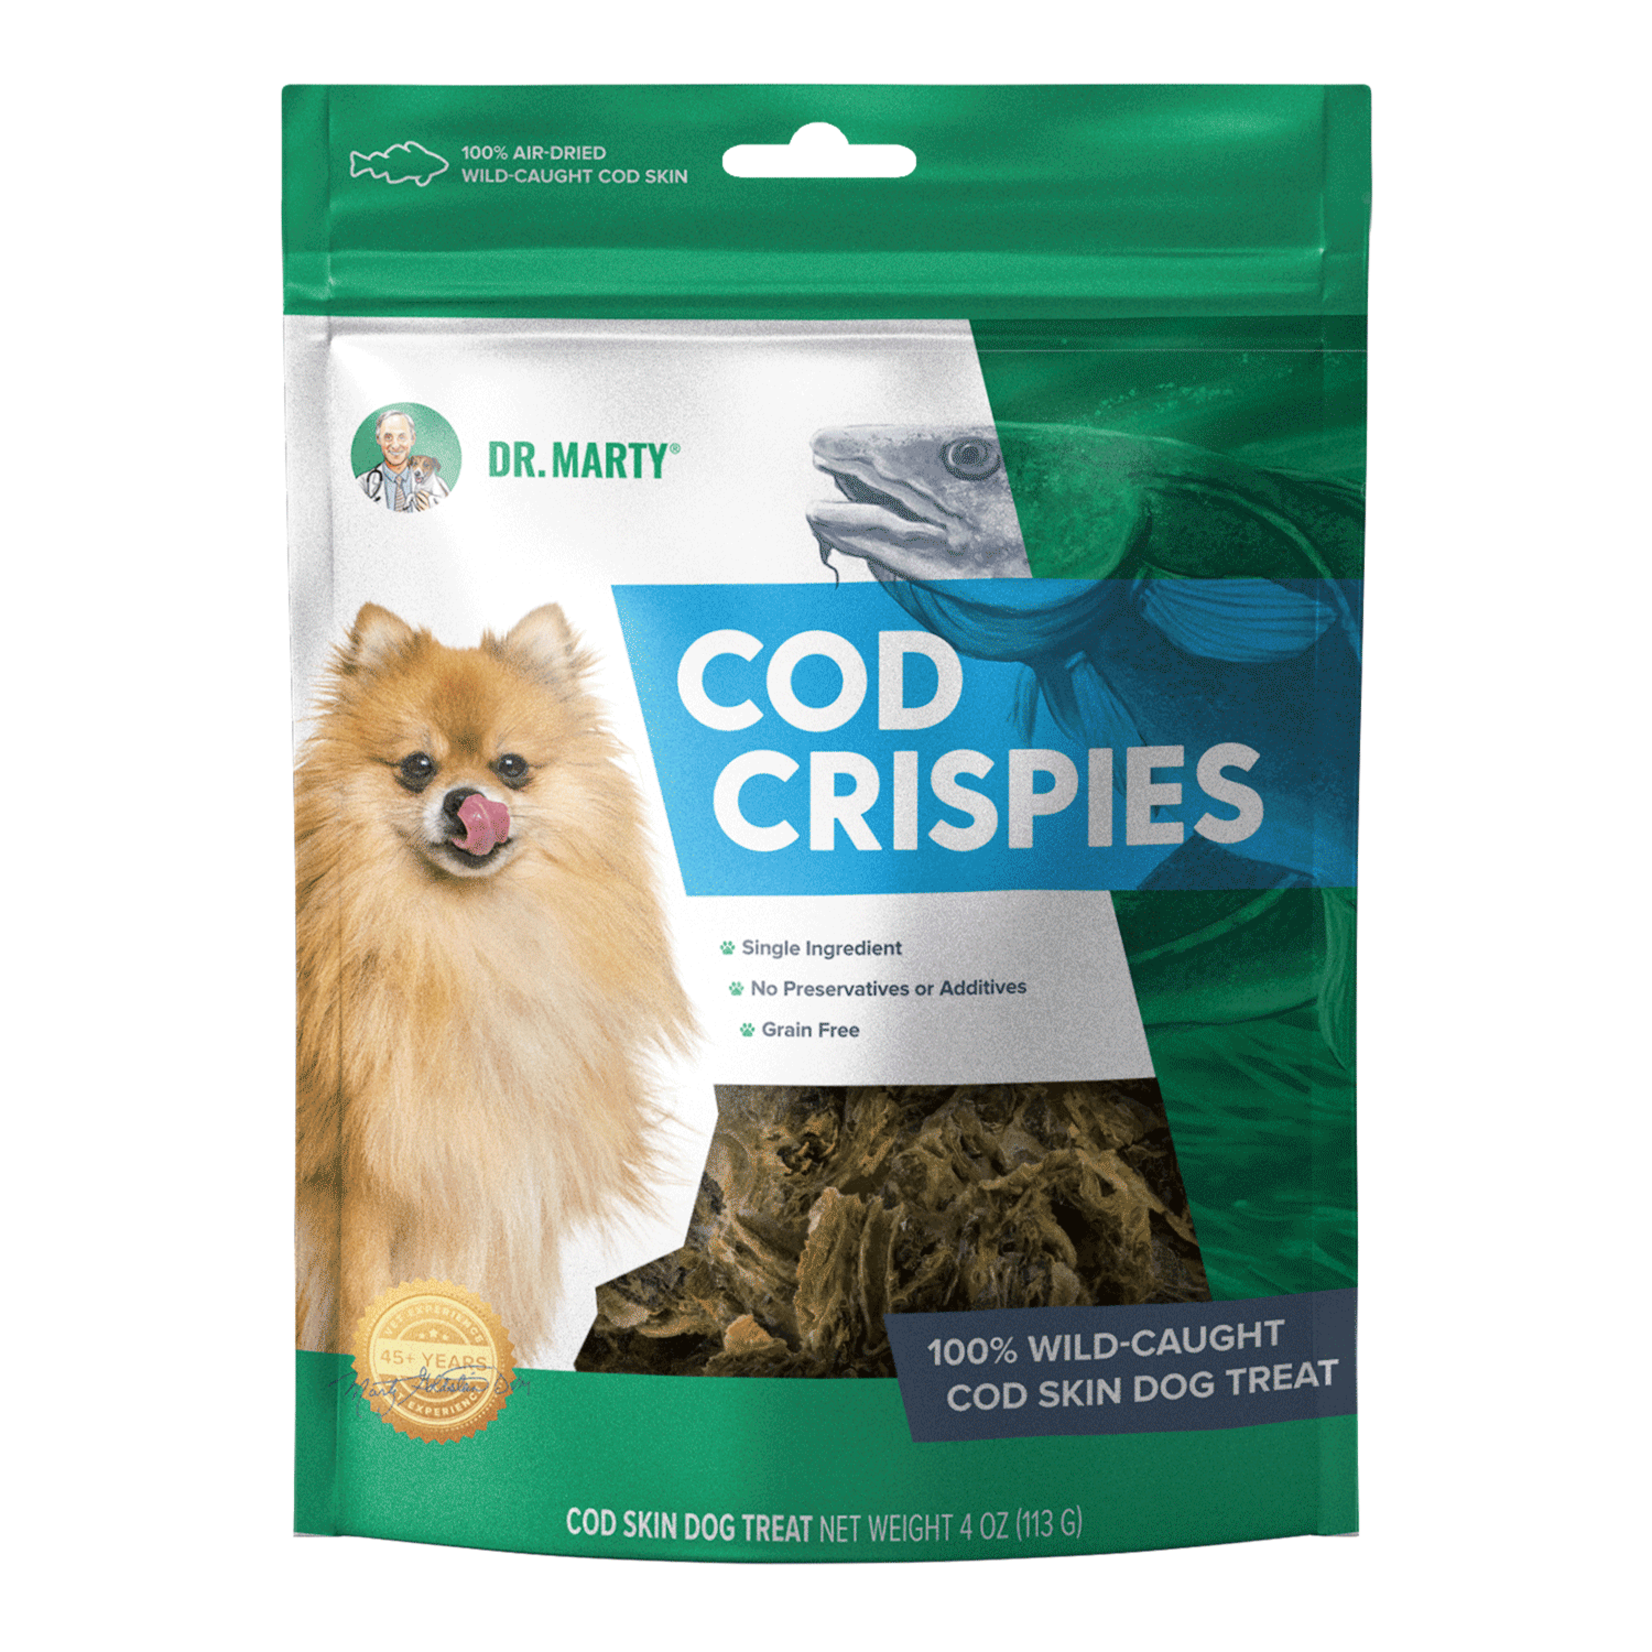 Dr. Marty Dr. Marty Cod Crispies Dog Treat